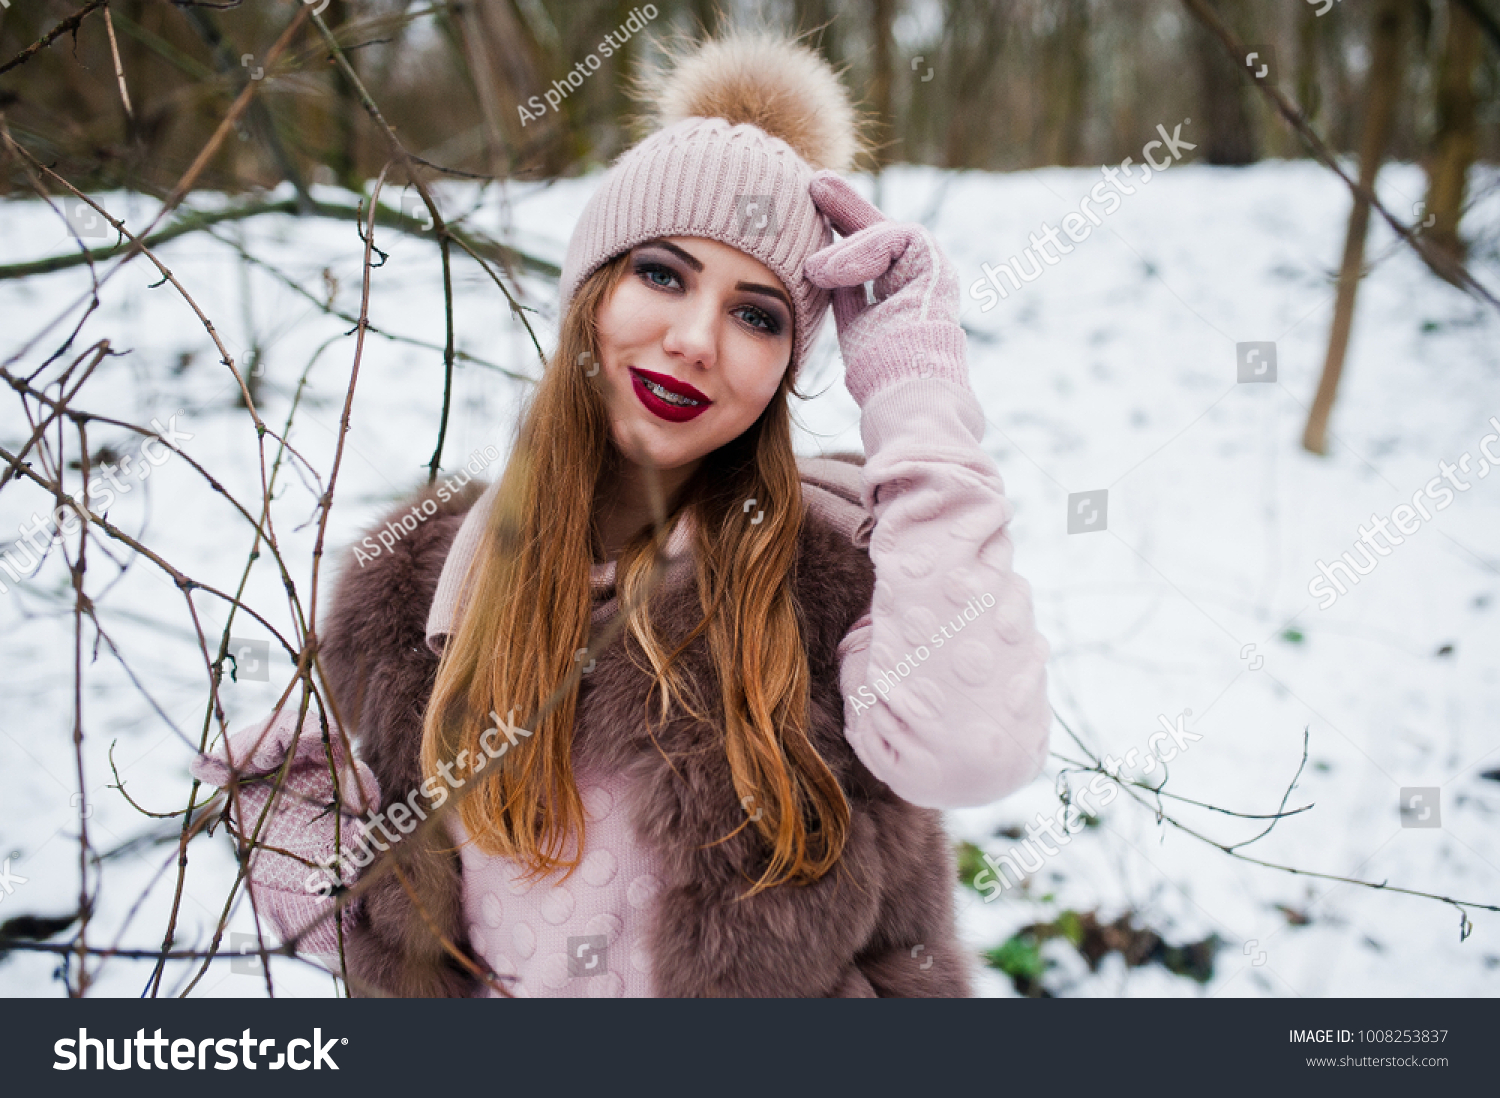 Girl with braces at winter day wear on fur coat and headwear. #1008253837